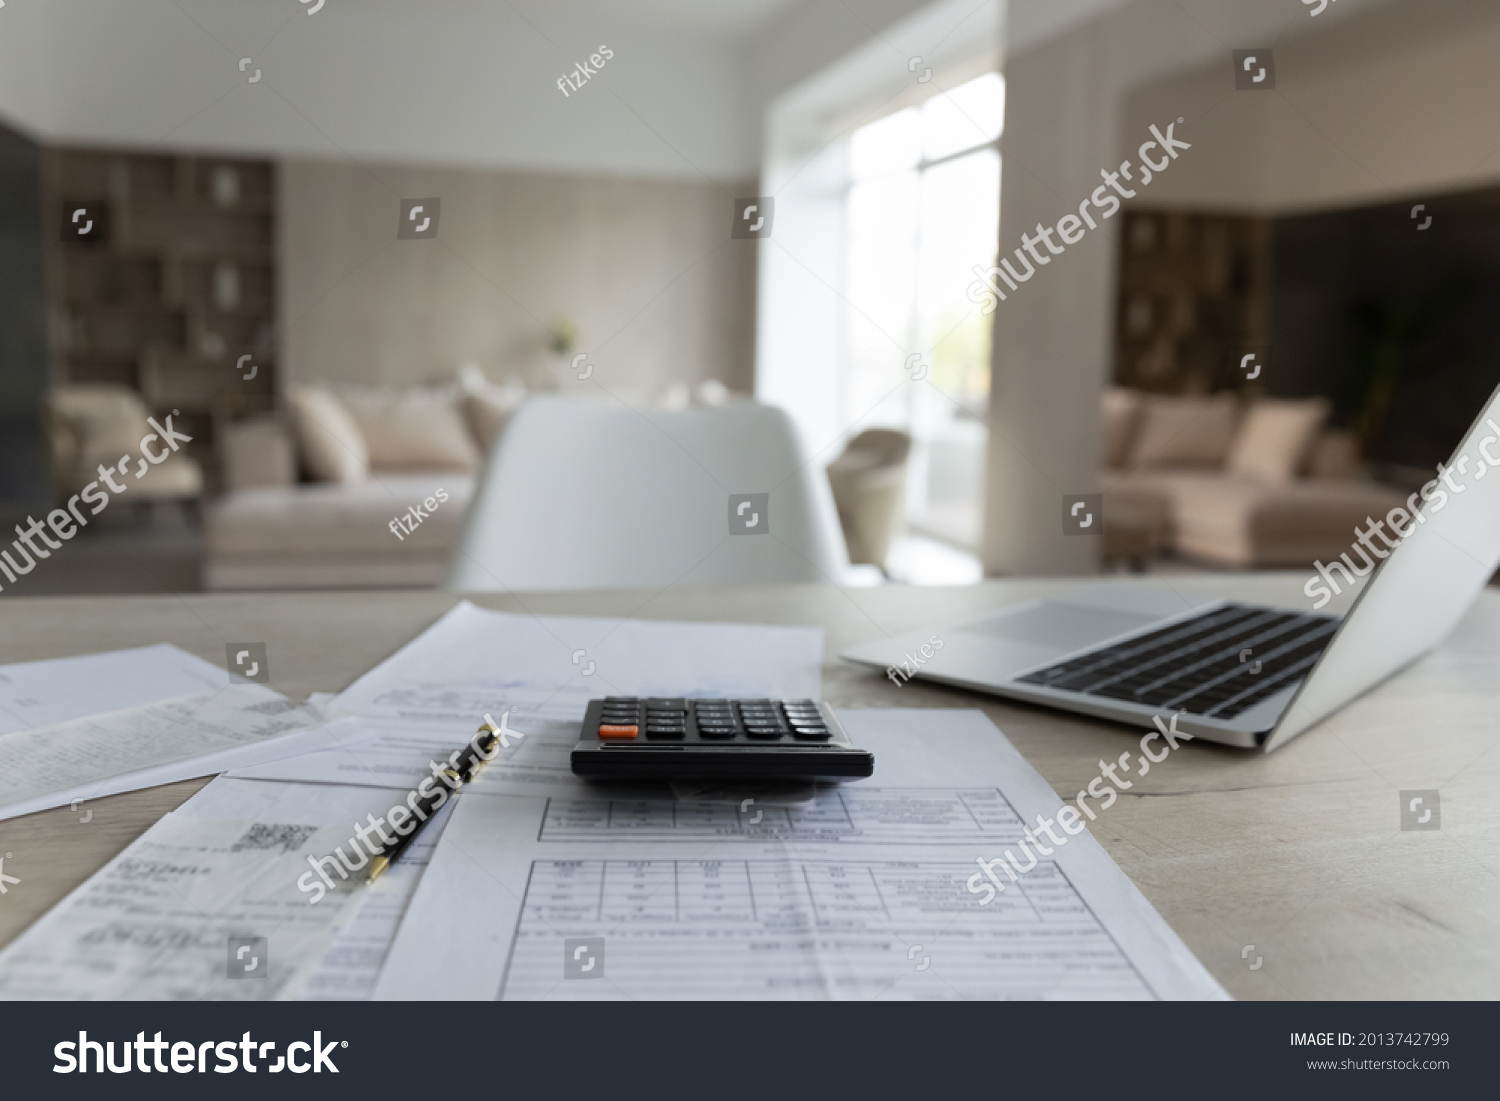 Close up of empty table at home with paper documents and bills for paying online on computer. No people, paper correspondence for managing budget or expenses, make payment on laptop. Finance concept. #2013742799